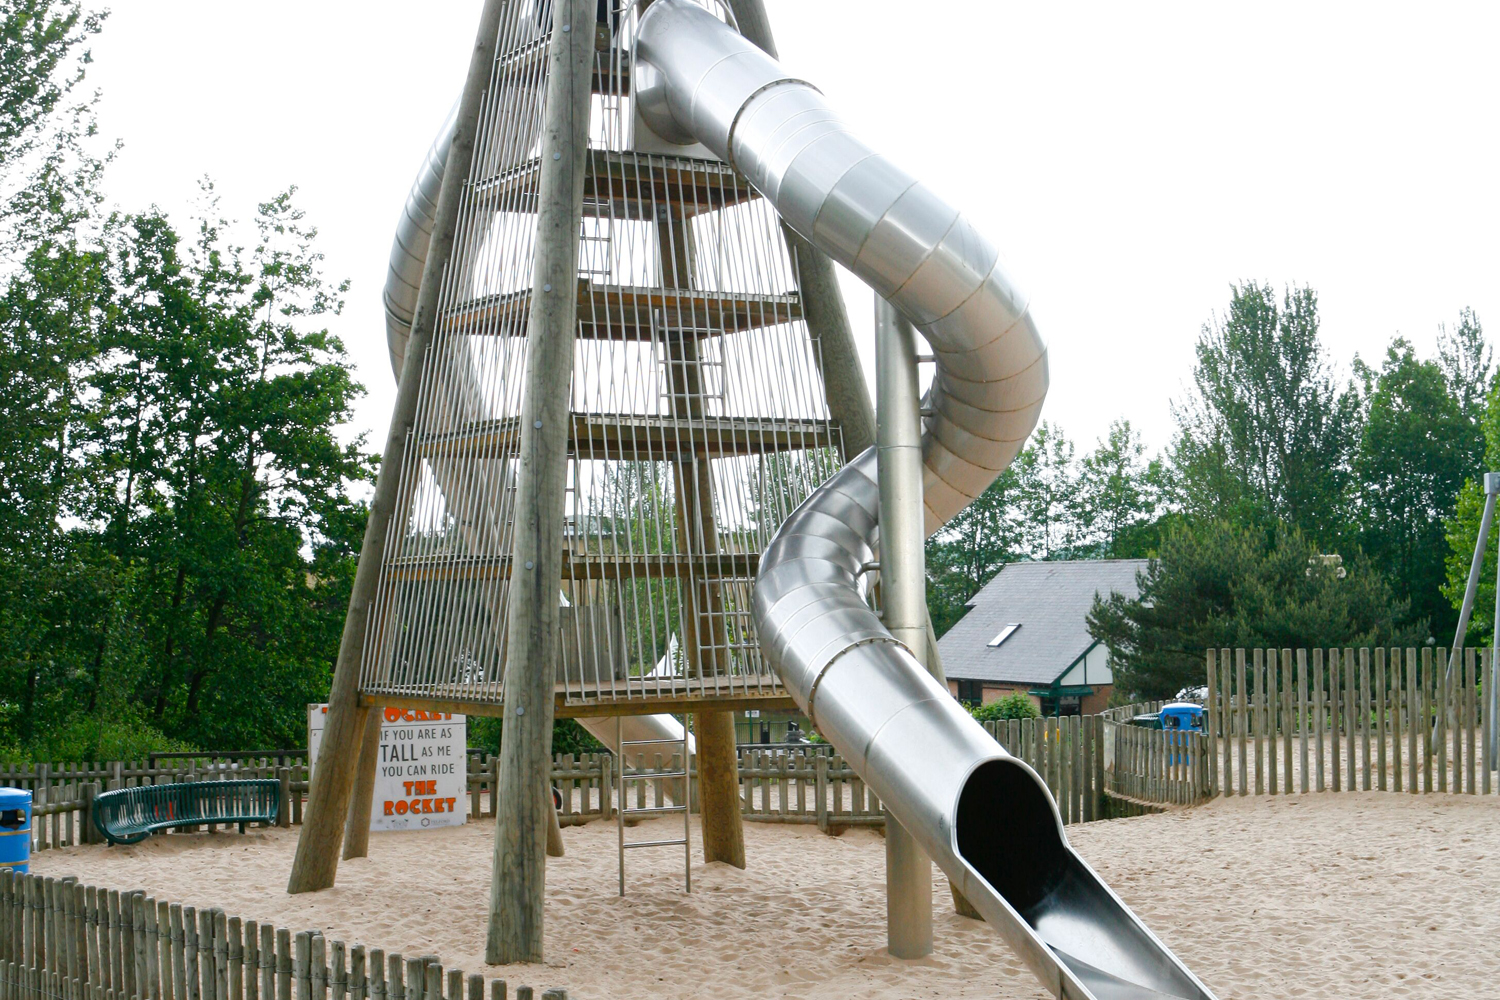 Picture of the rocket slide in Telford Town Park